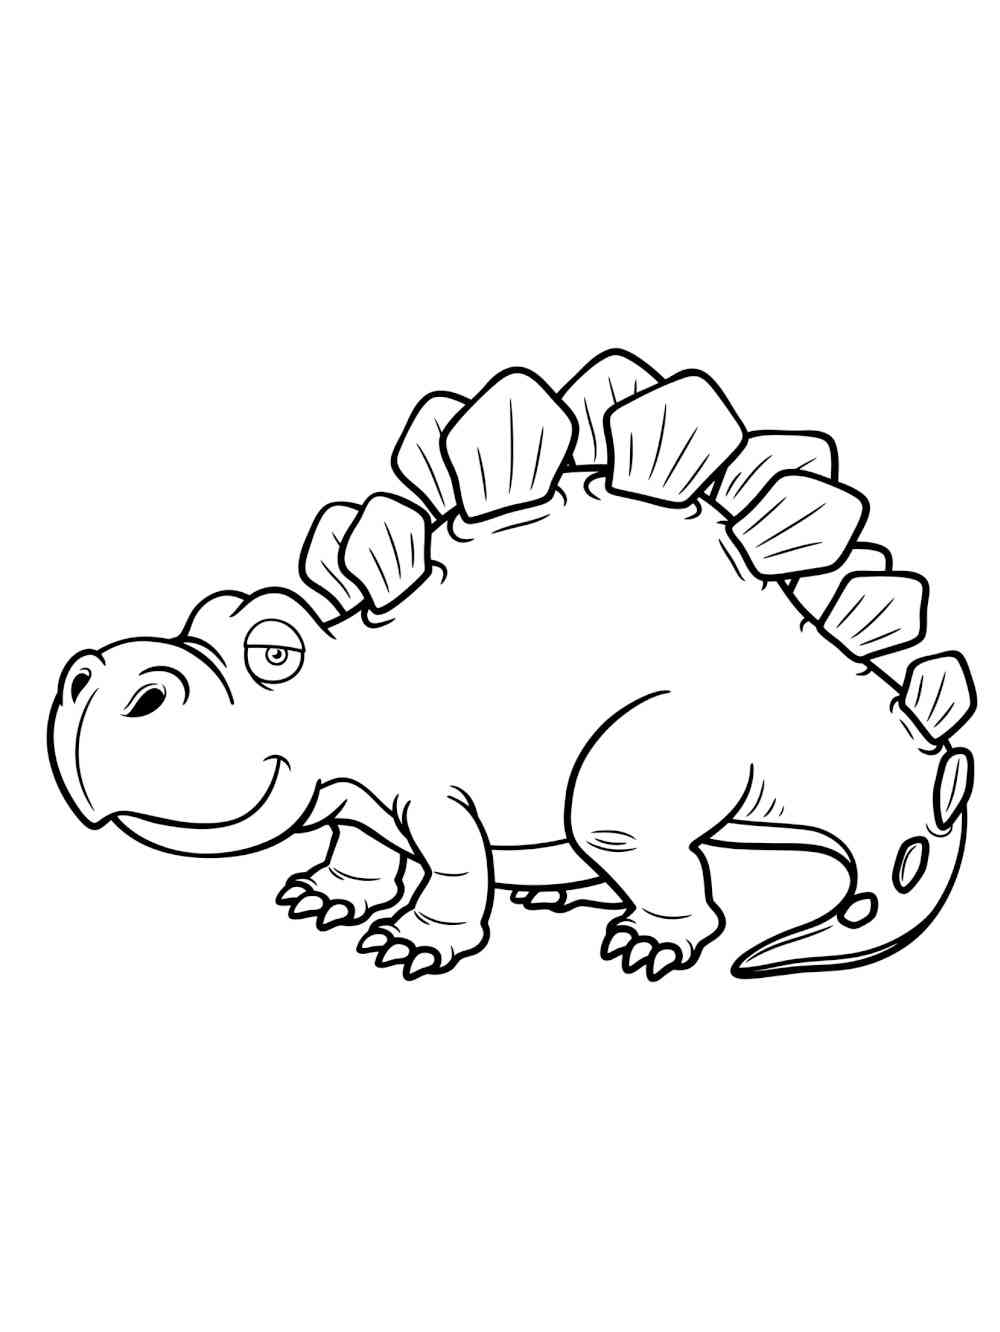 Funny Little Stegosaurus coloring page